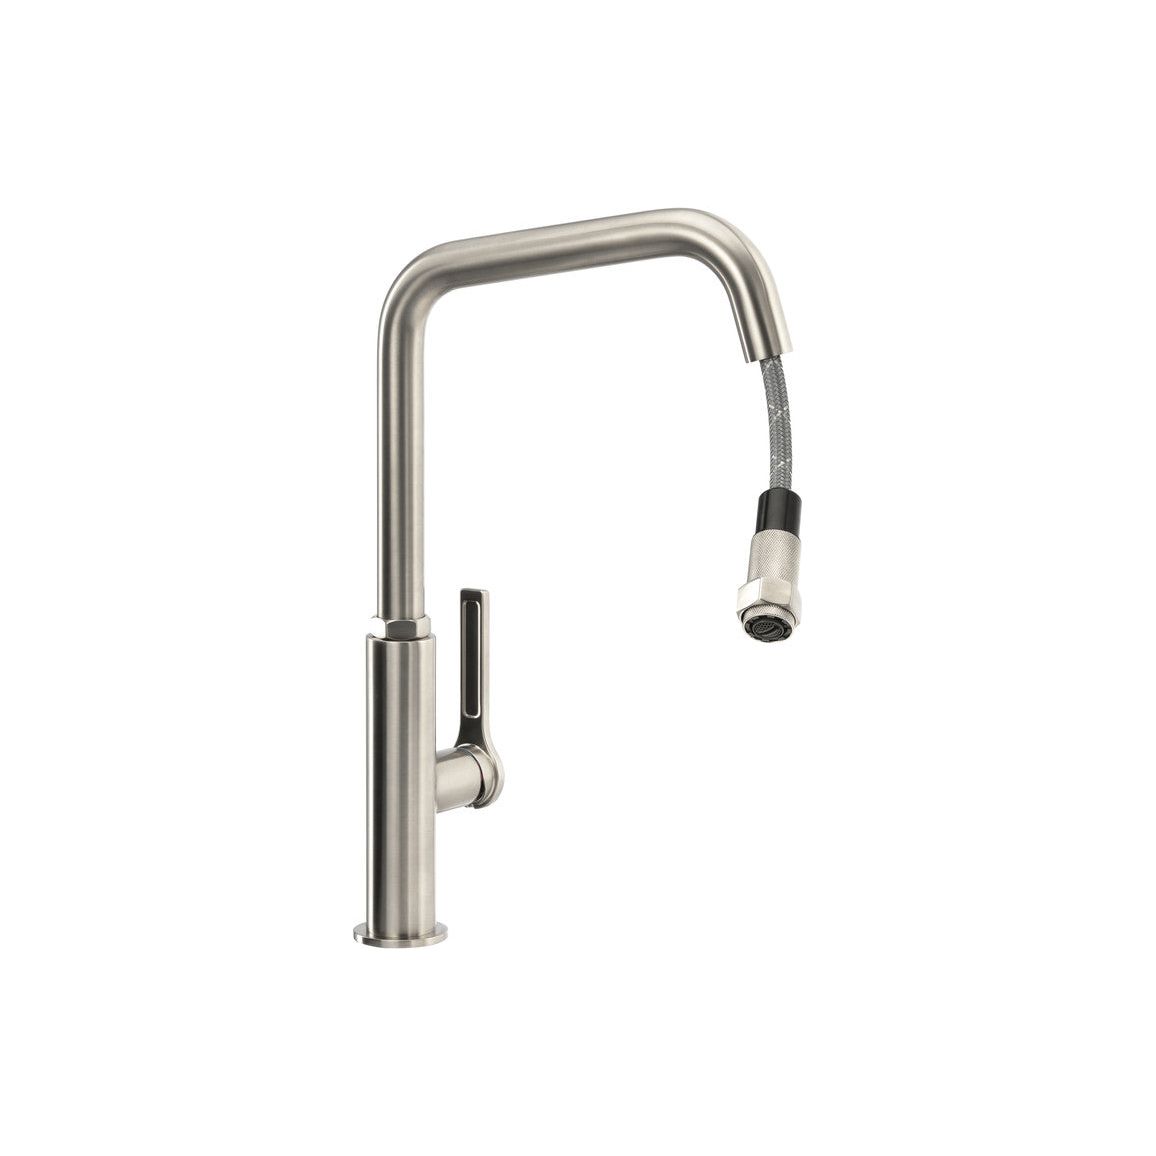 Abode Hex Single Lever Mixer Tap w/Pull Out - Brushed Nickel